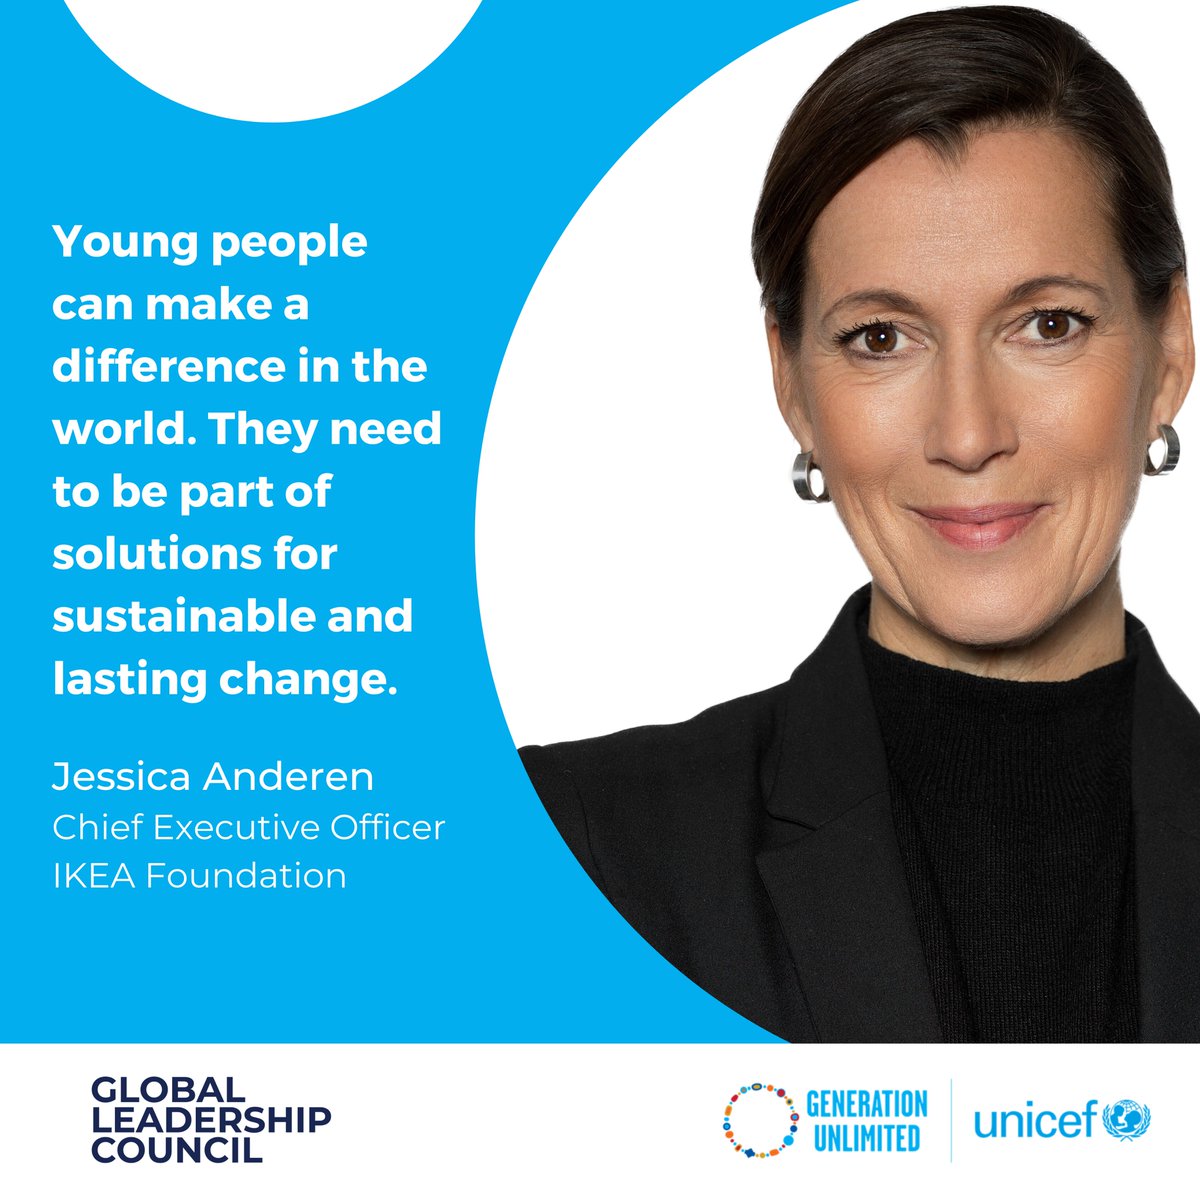 🌟 @GenUnlimited_ welcomes Jessica Anderen, CEO of @IKEAFoundation, to the Global Leadership Council. Her commitment to drive inclusive positive change inspires us all. Together, we look forward to empowering youth with #SkillsRightNow and opportunities in a sustainable world.